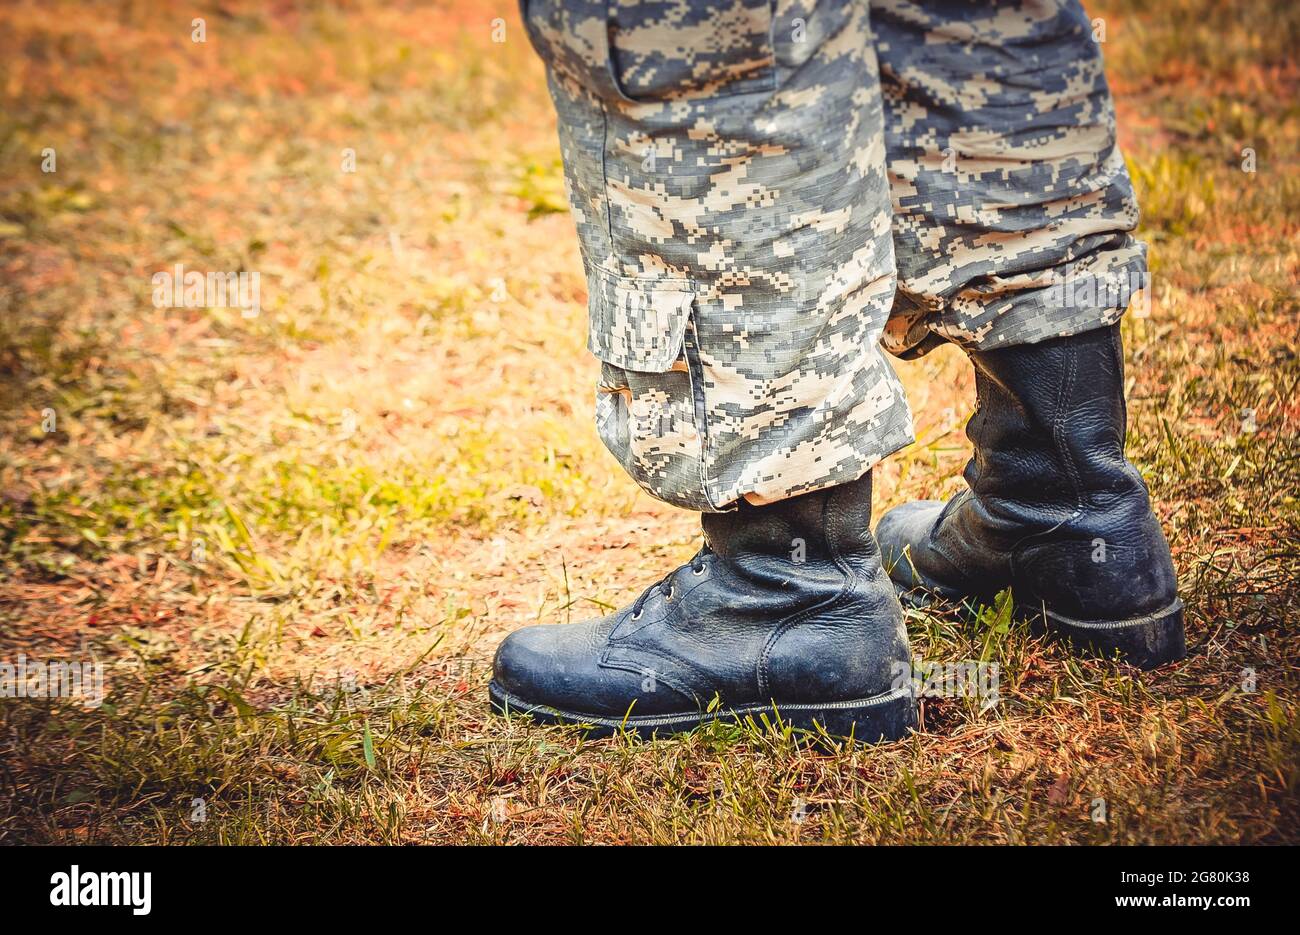 man stands in military boots and trousers Stock Photo